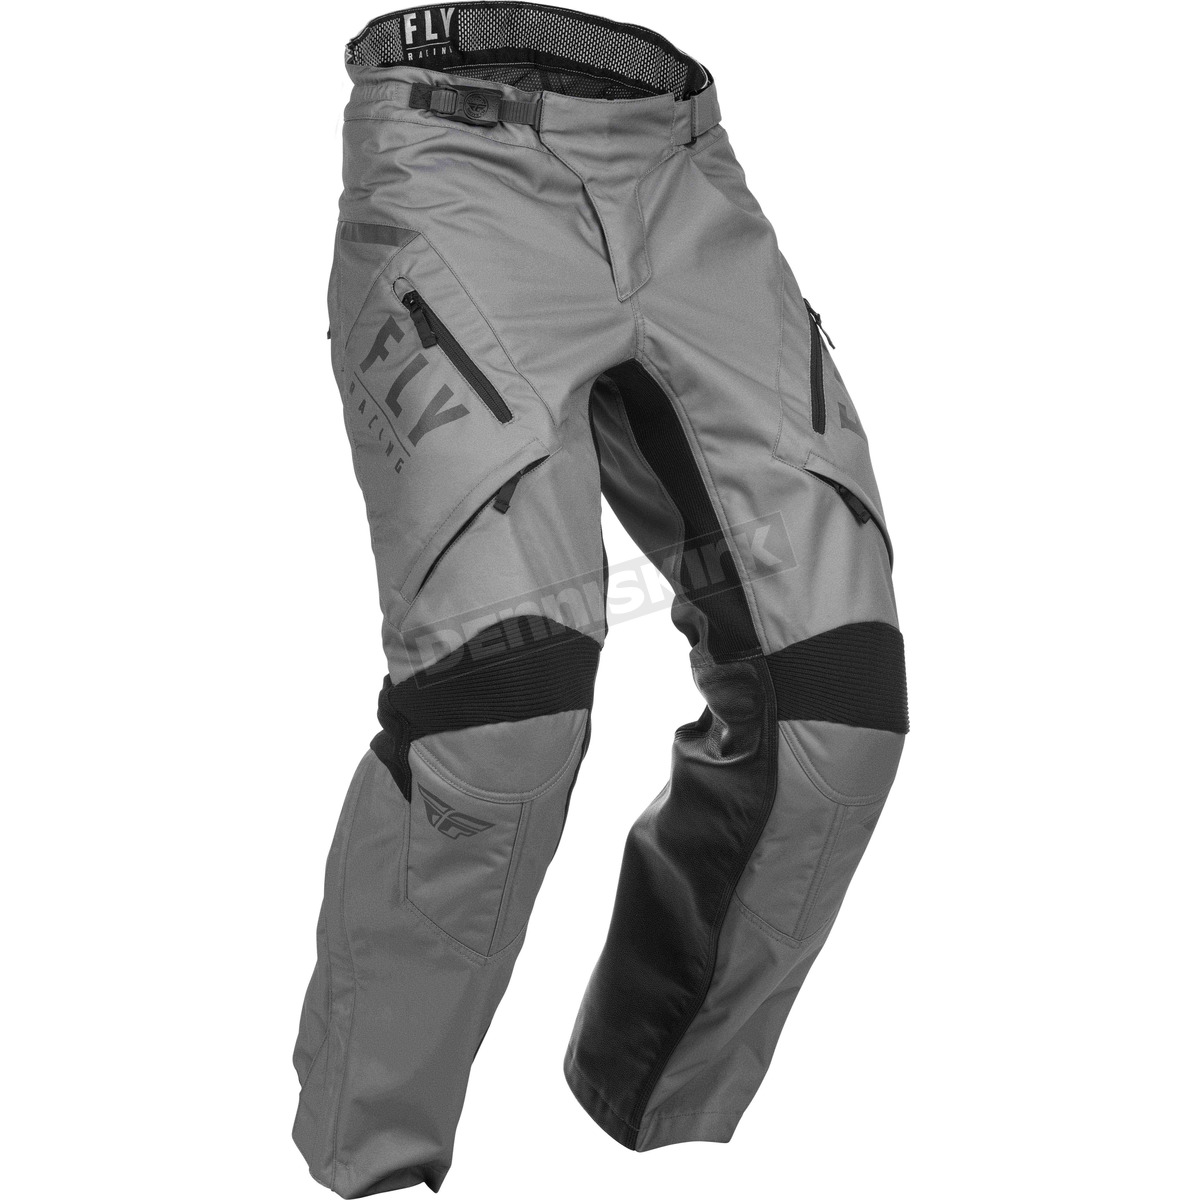 Fly Racing Mens Patrol Over Boot Pants Black//Gray Size 44